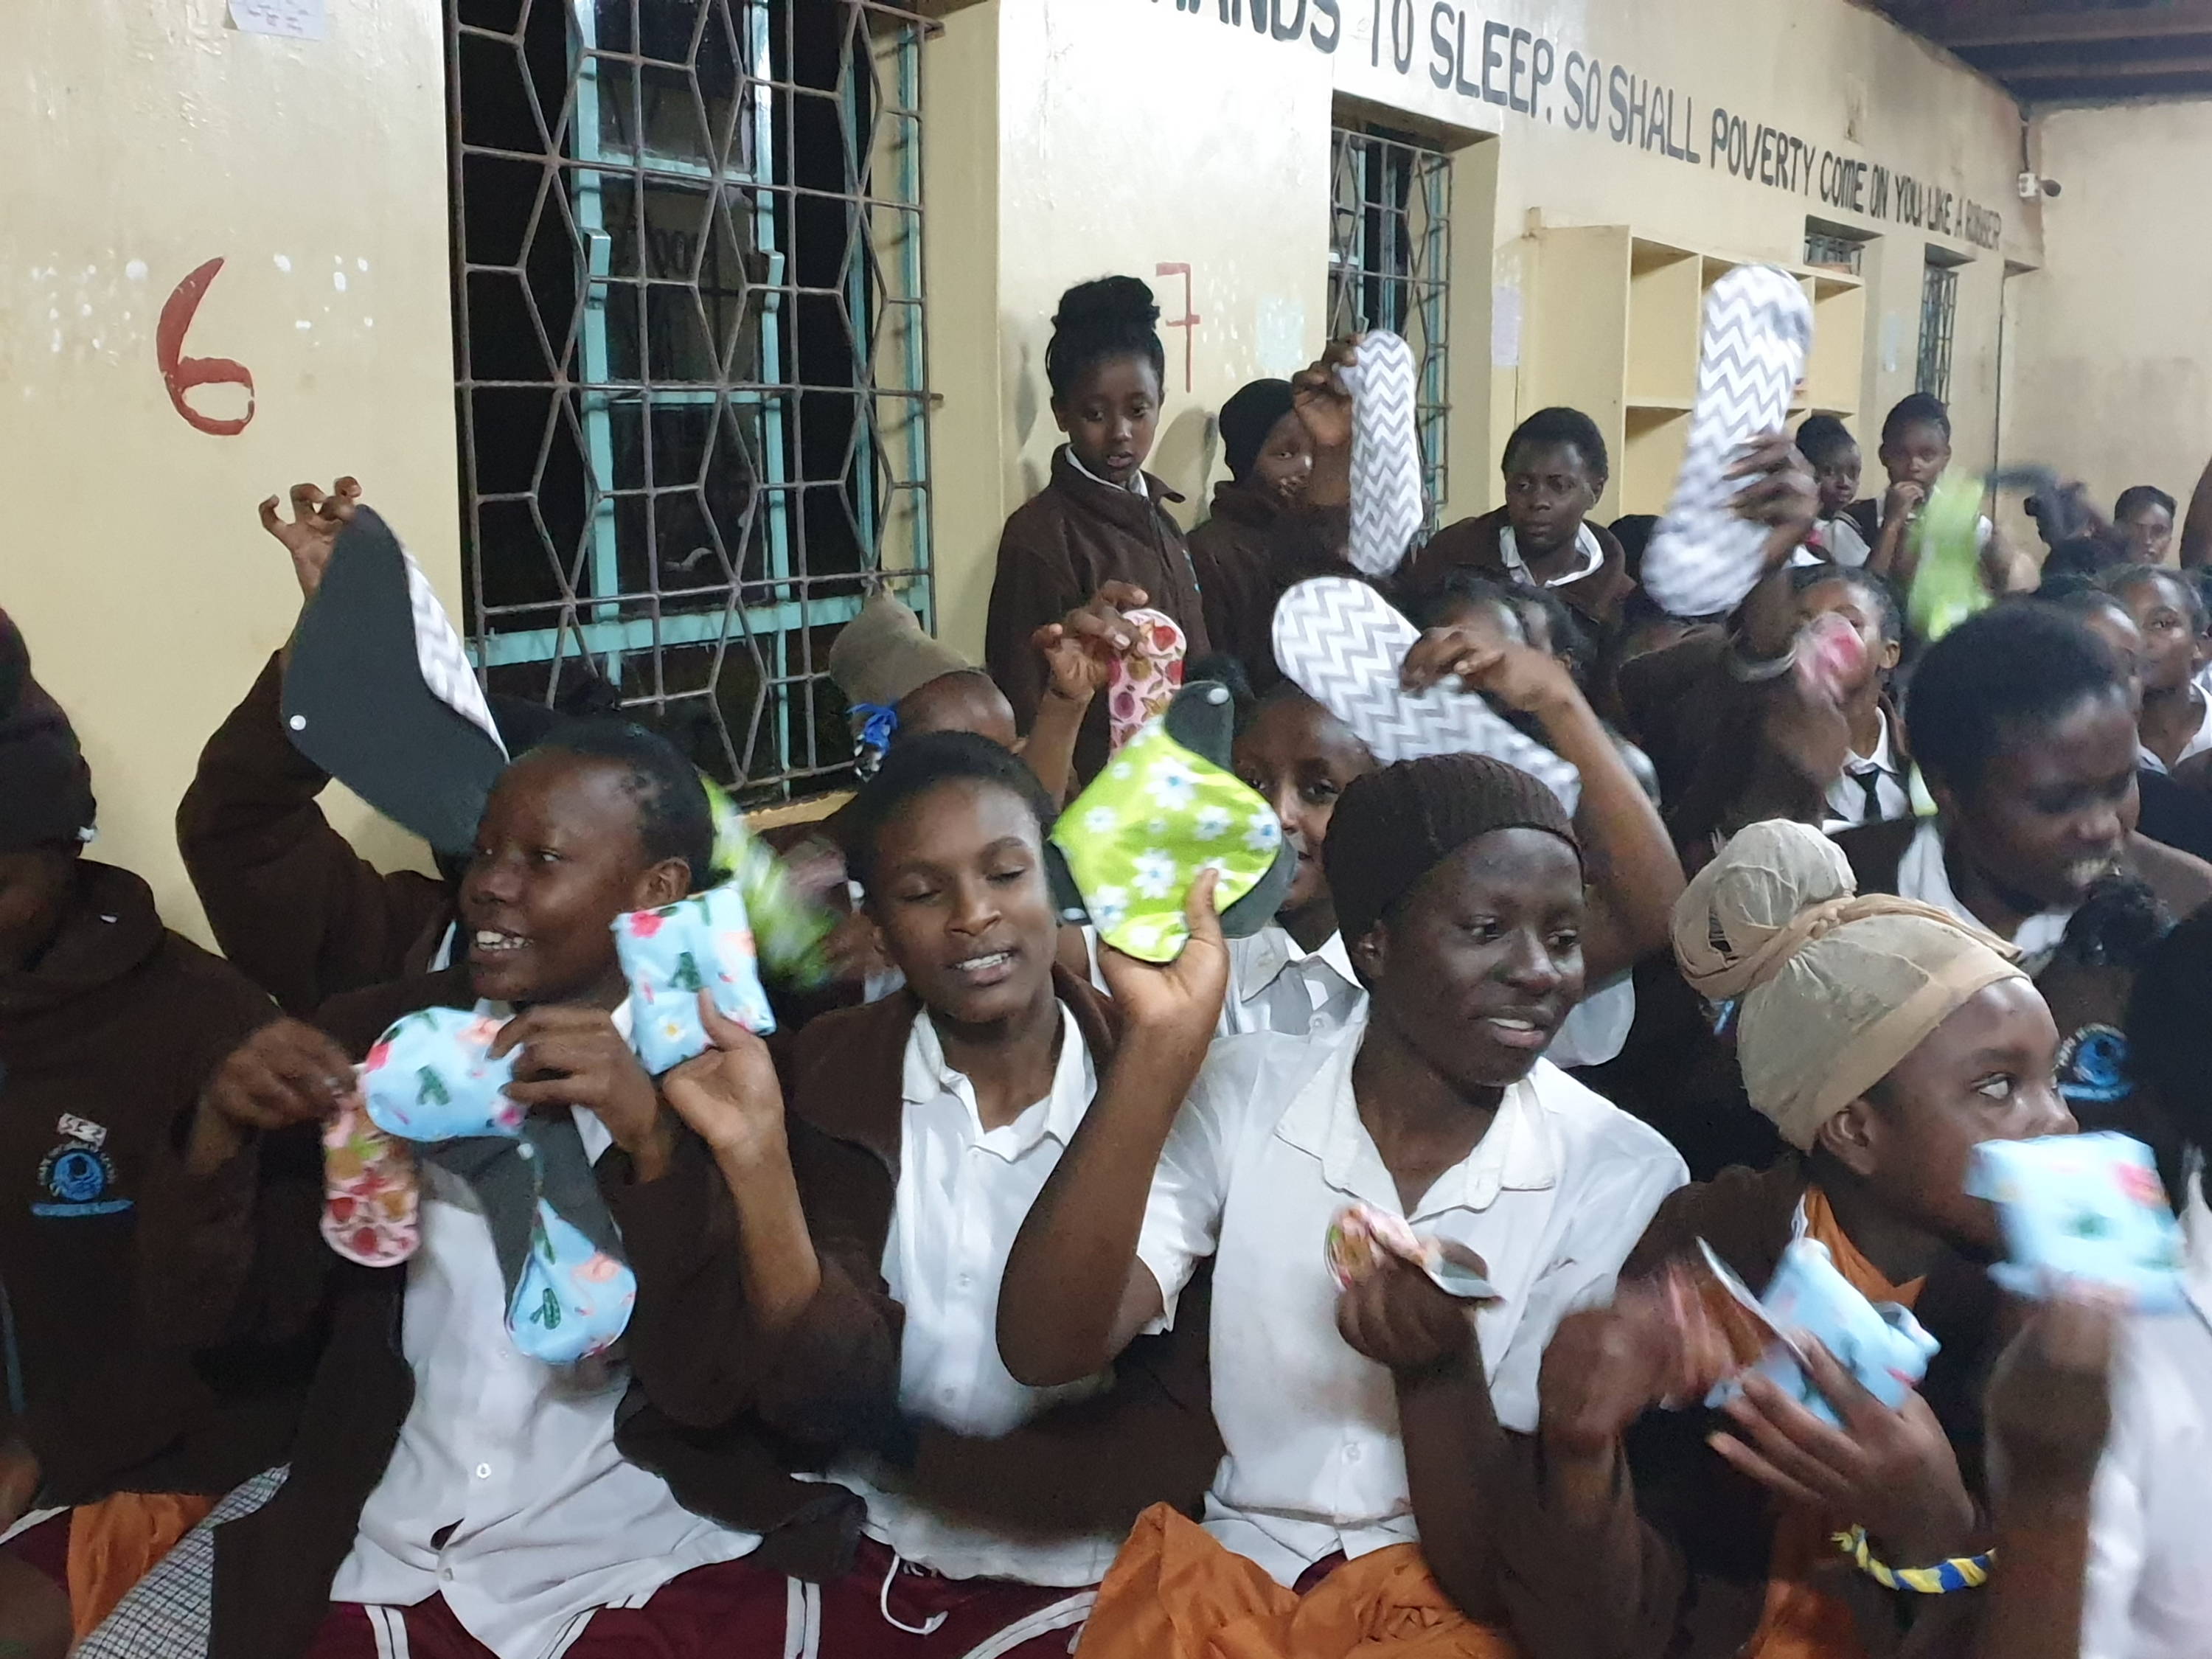 The women's shelter in Uganda receiving Flow Co.'s donation of reusable period pads to the village.